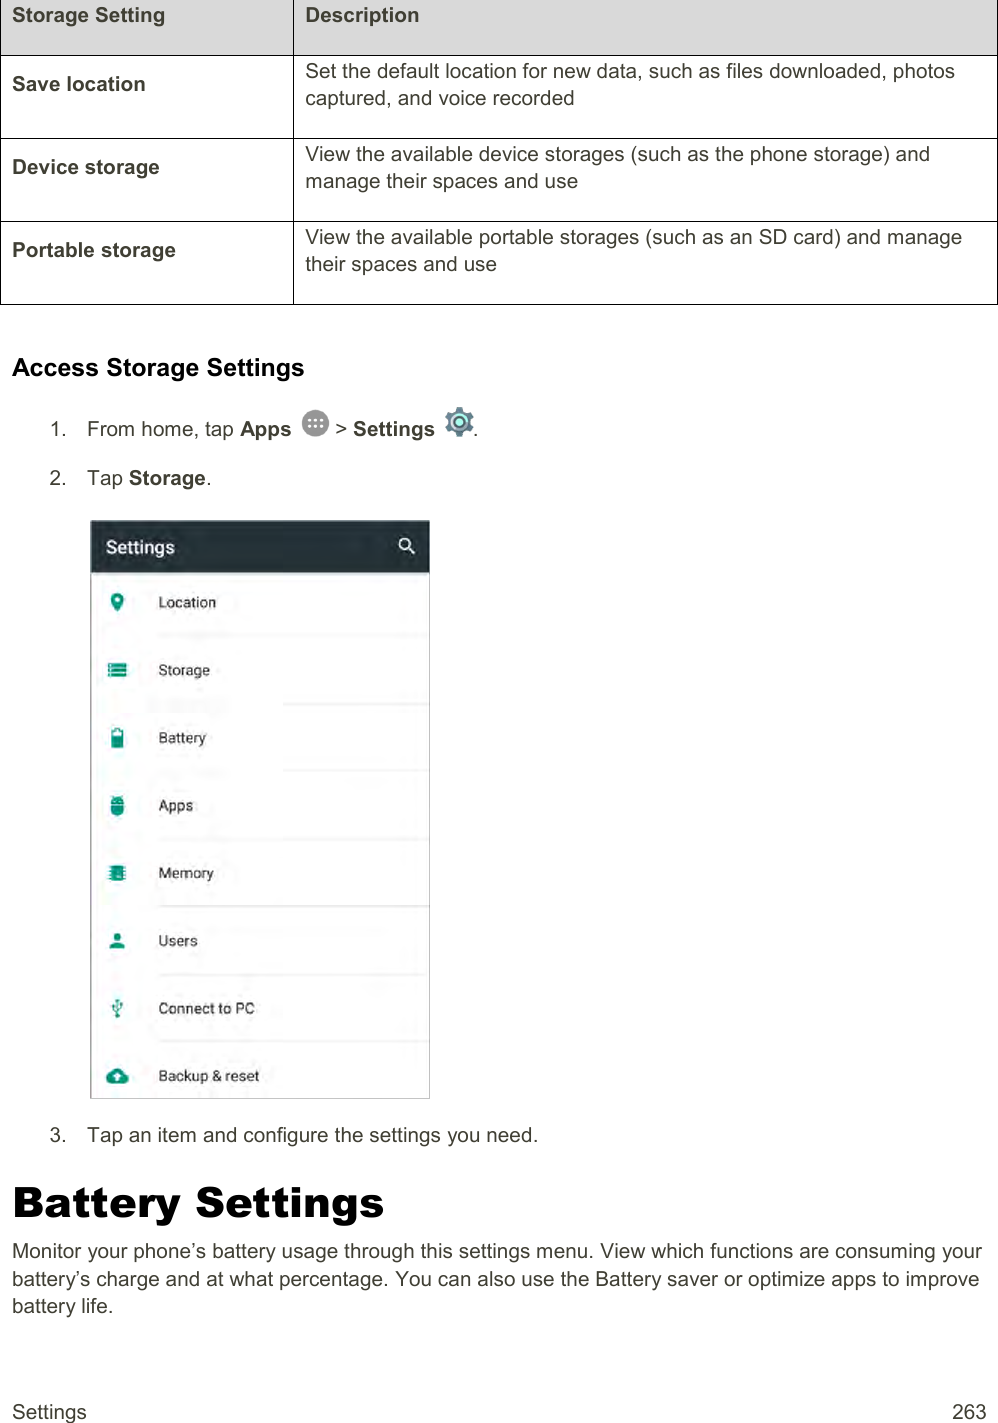 Settings  263 Storage Setting Description Save location Set the default location for new data, such as files downloaded, photos captured, and voice recorded Device storage View the available device storages (such as the phone storage) and manage their spaces and use Portable storage View the available portable storages (such as an SD card) and manage their spaces and use  Access Storage Settings 1.  From home, tap Apps   &gt; Settings  .  2.  Tap Storage.   3.  Tap an item and configure the settings you need. Battery Settings Monitor your phone’s battery usage through this settings menu. View which functions are consuming your battery’s charge and at what percentage. You can also use the Battery saver or optimize apps to improve battery life. 